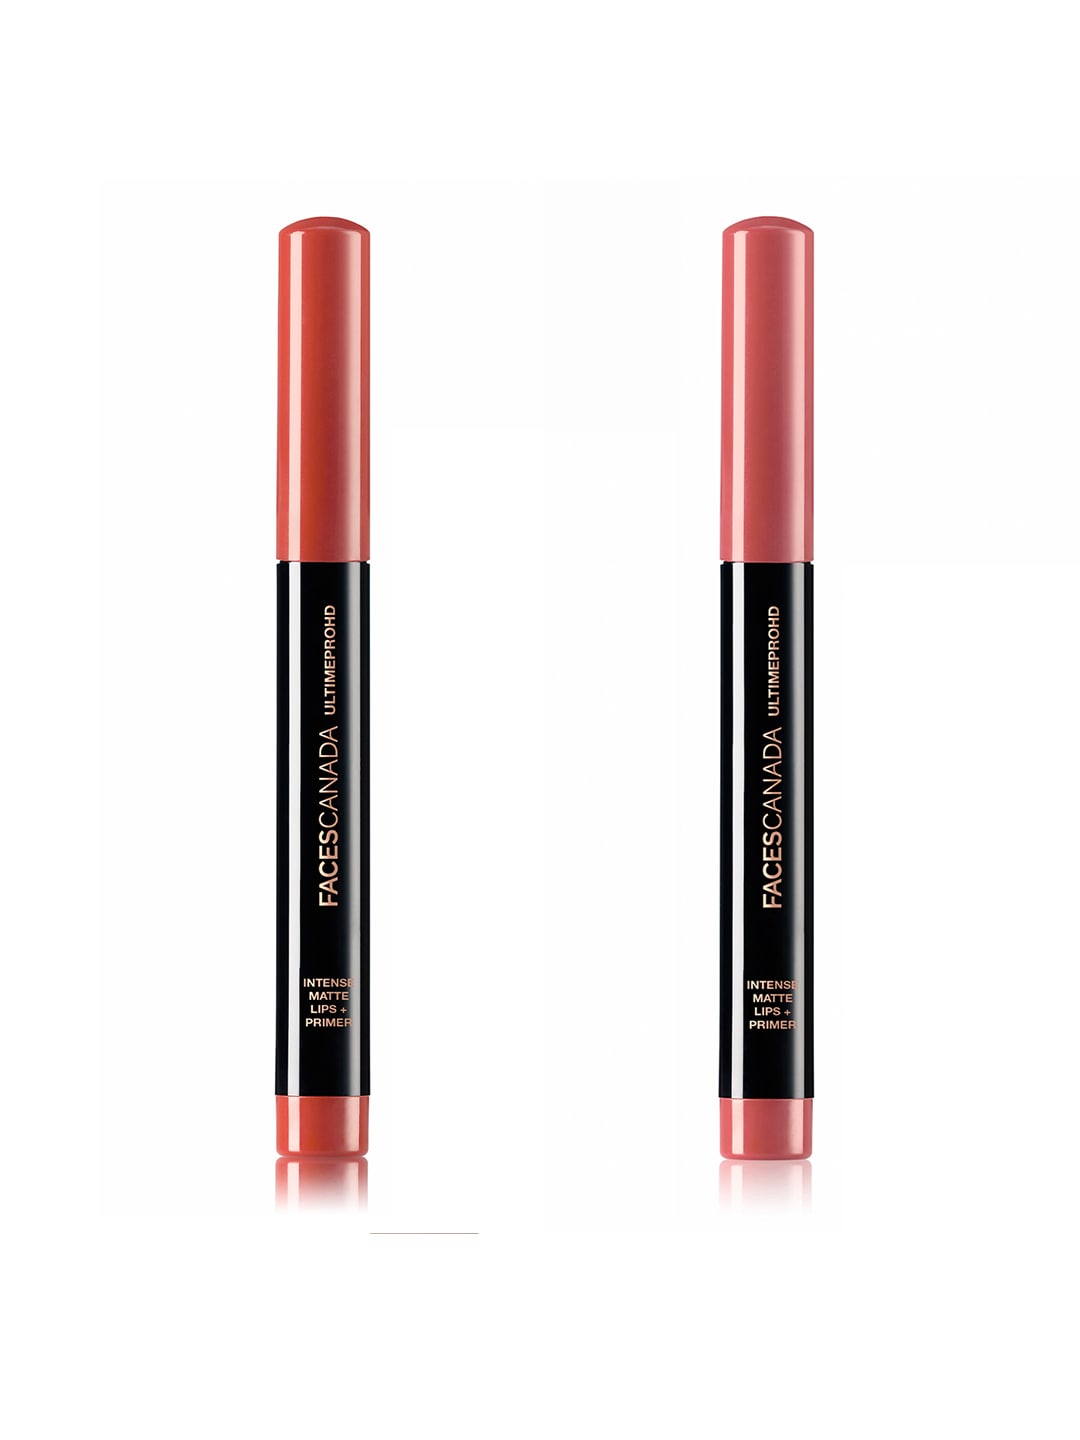 FACES CANADA Set of 2 Ultimepro Hd Intense Matte Lips + Primer Lipstick Price in India